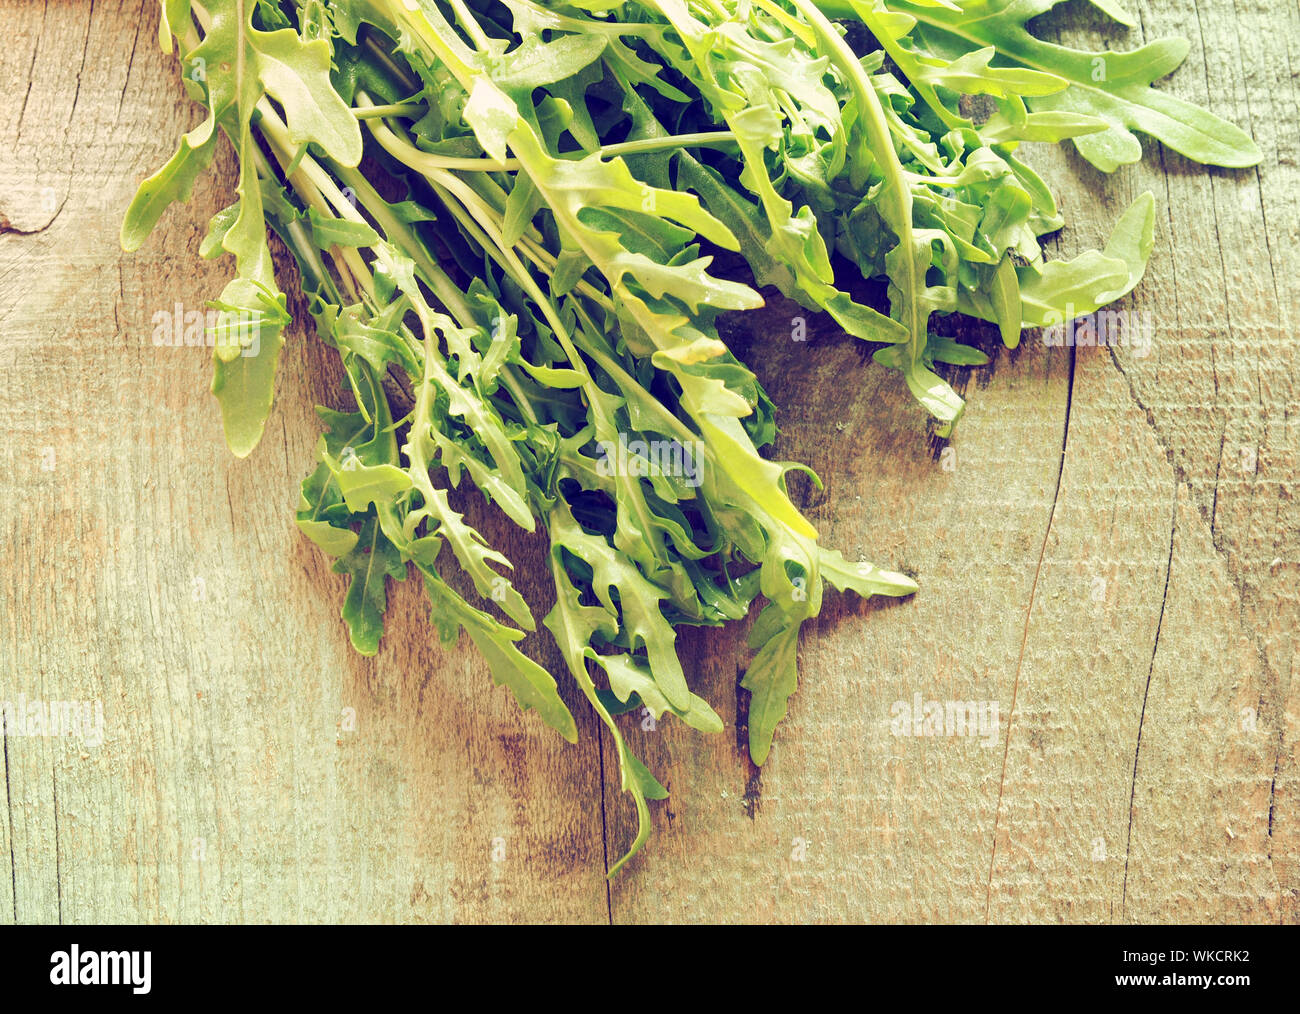 Close-up Of Arugula On Wooden Table Stock Photo